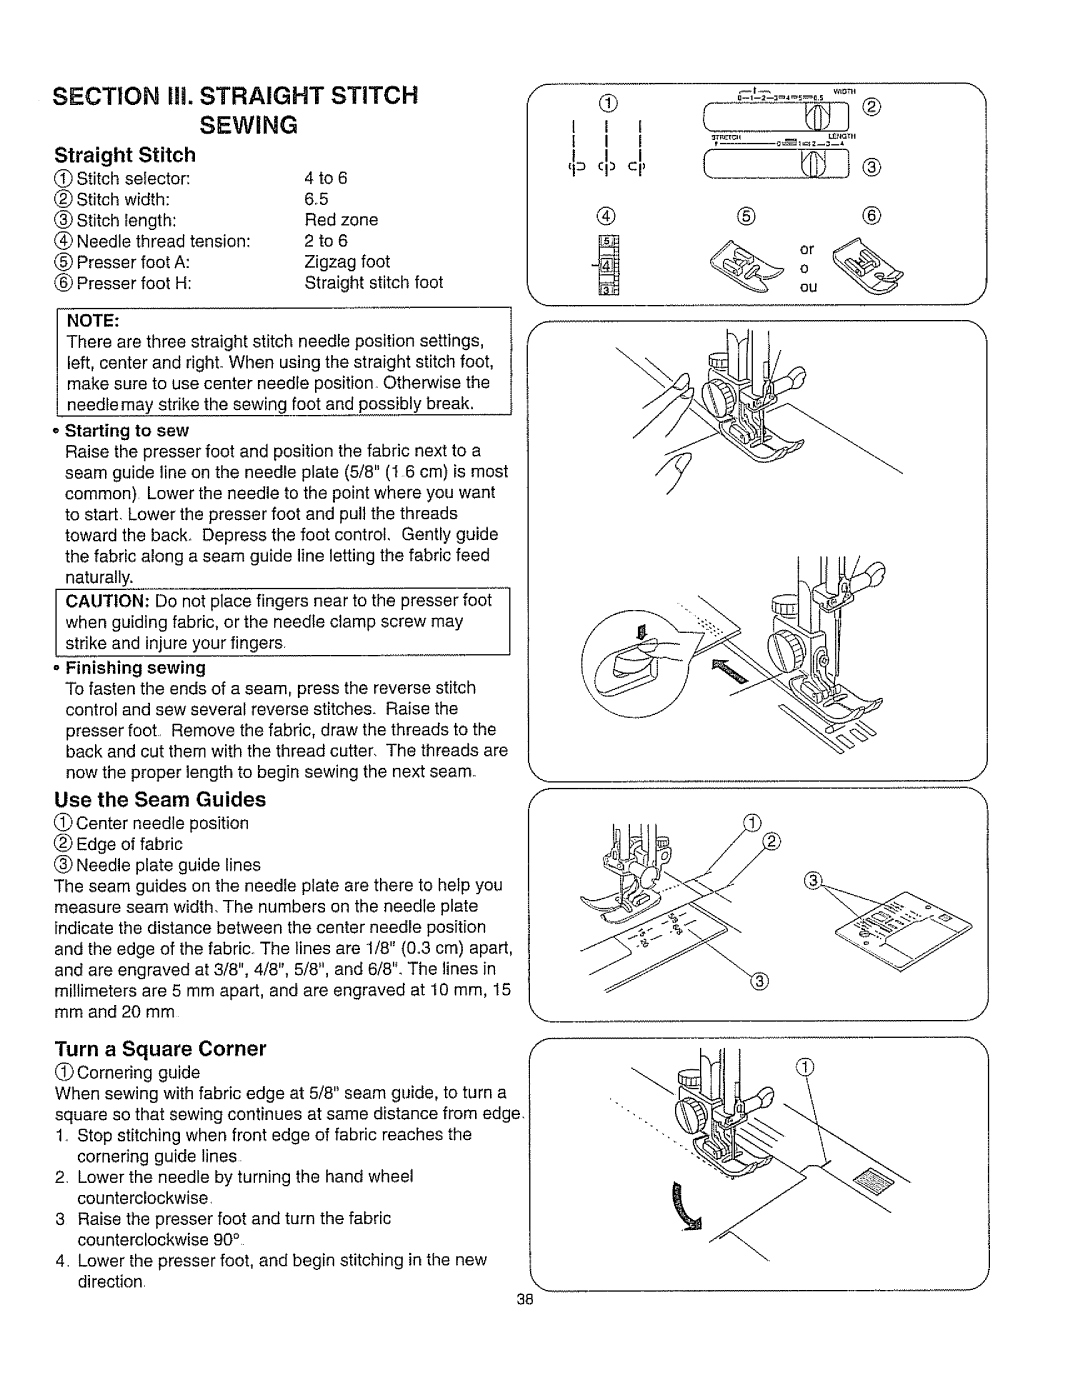 Kenmore 385.162213 owner manual SECTION Ill. STRAIGHT STITCH SEWING, Turn a Square Corner, Straight, Or ouO 